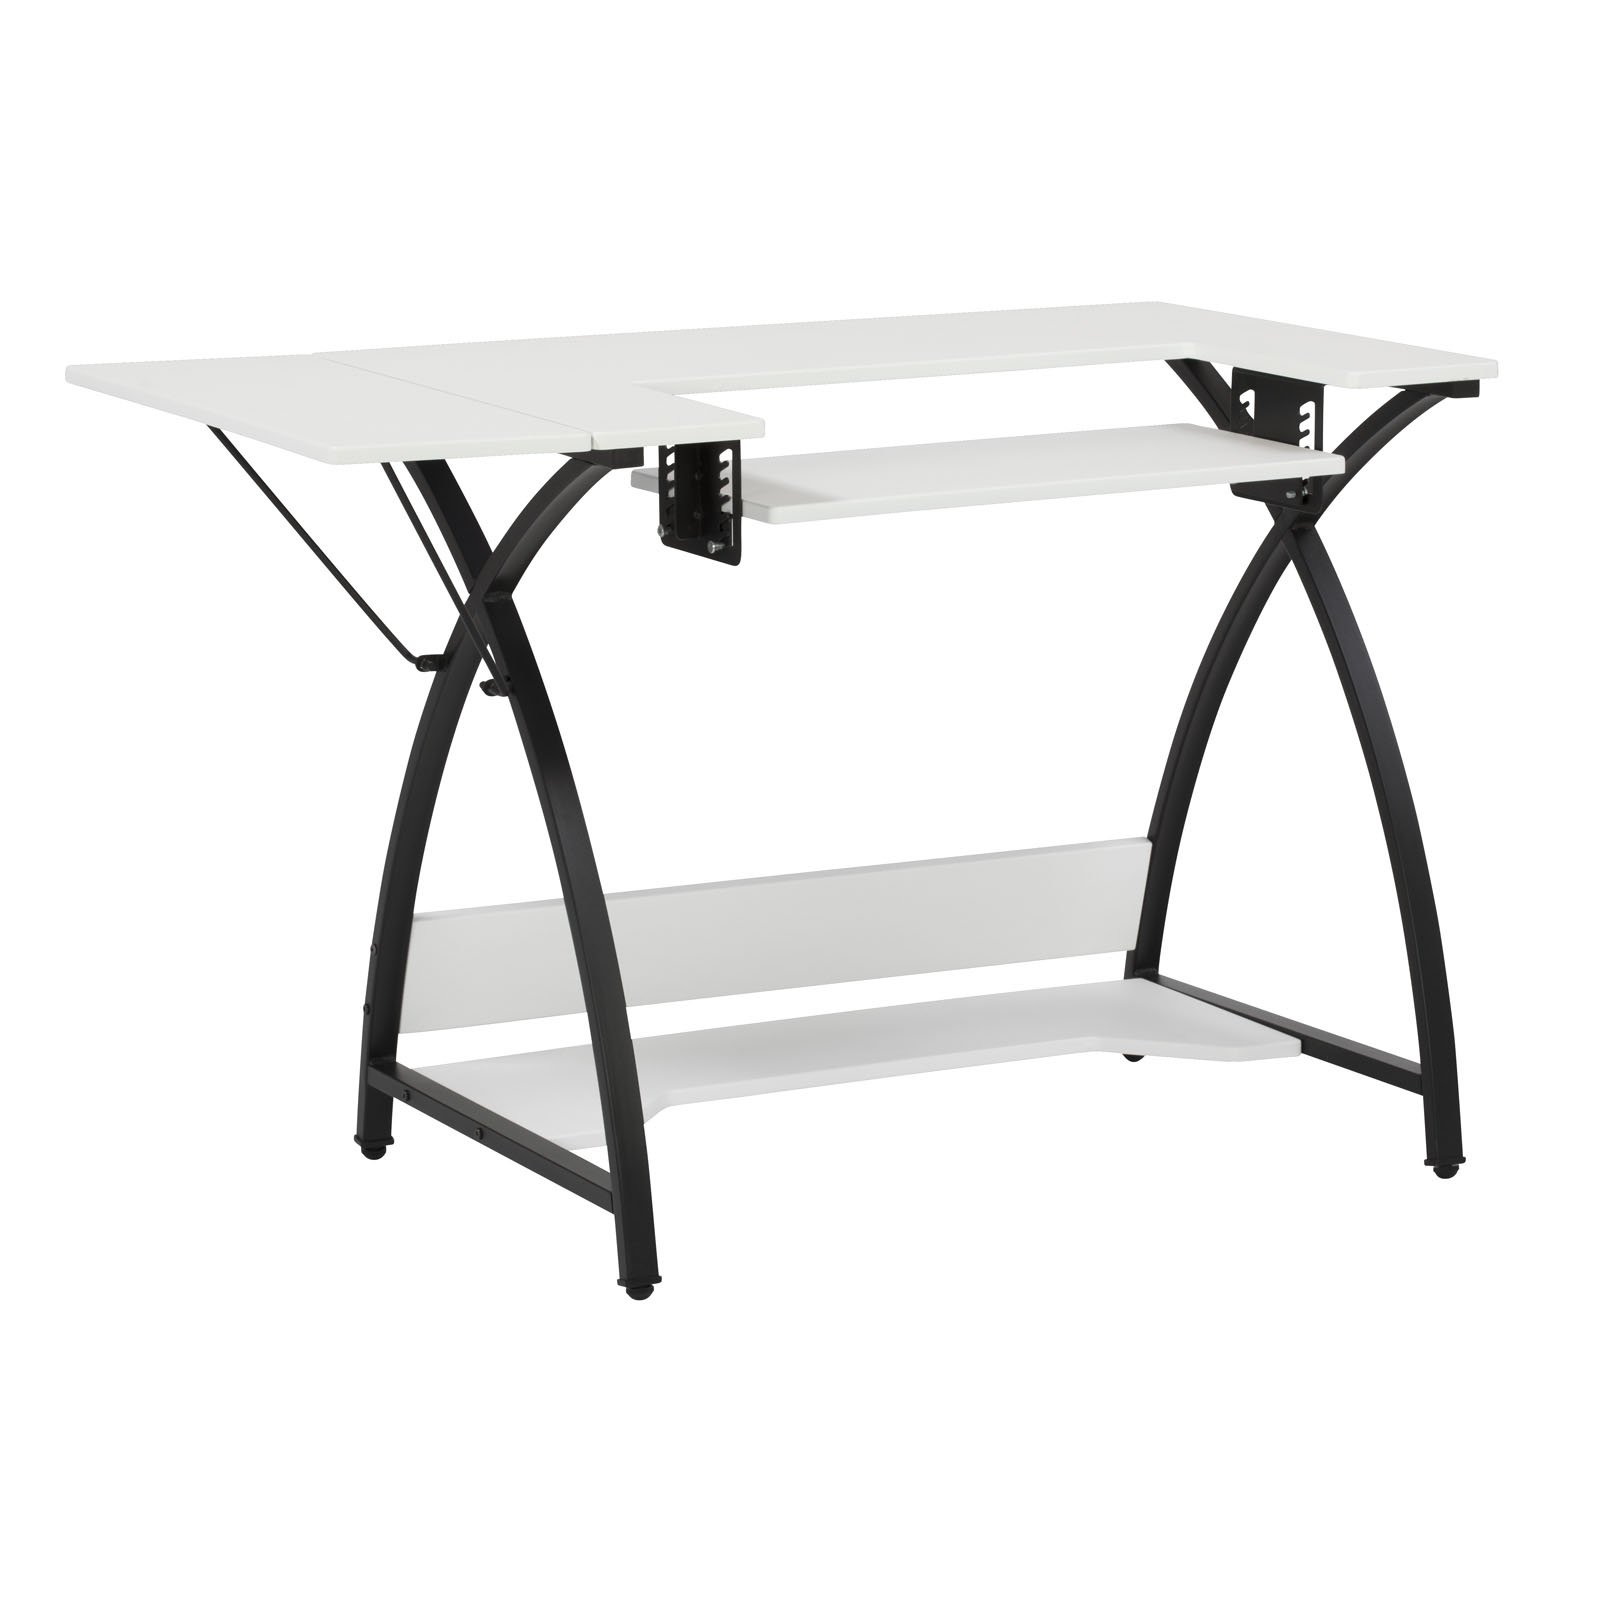 Studio Designs 45.5-in White Traditional Sewing Table at Lowes.com